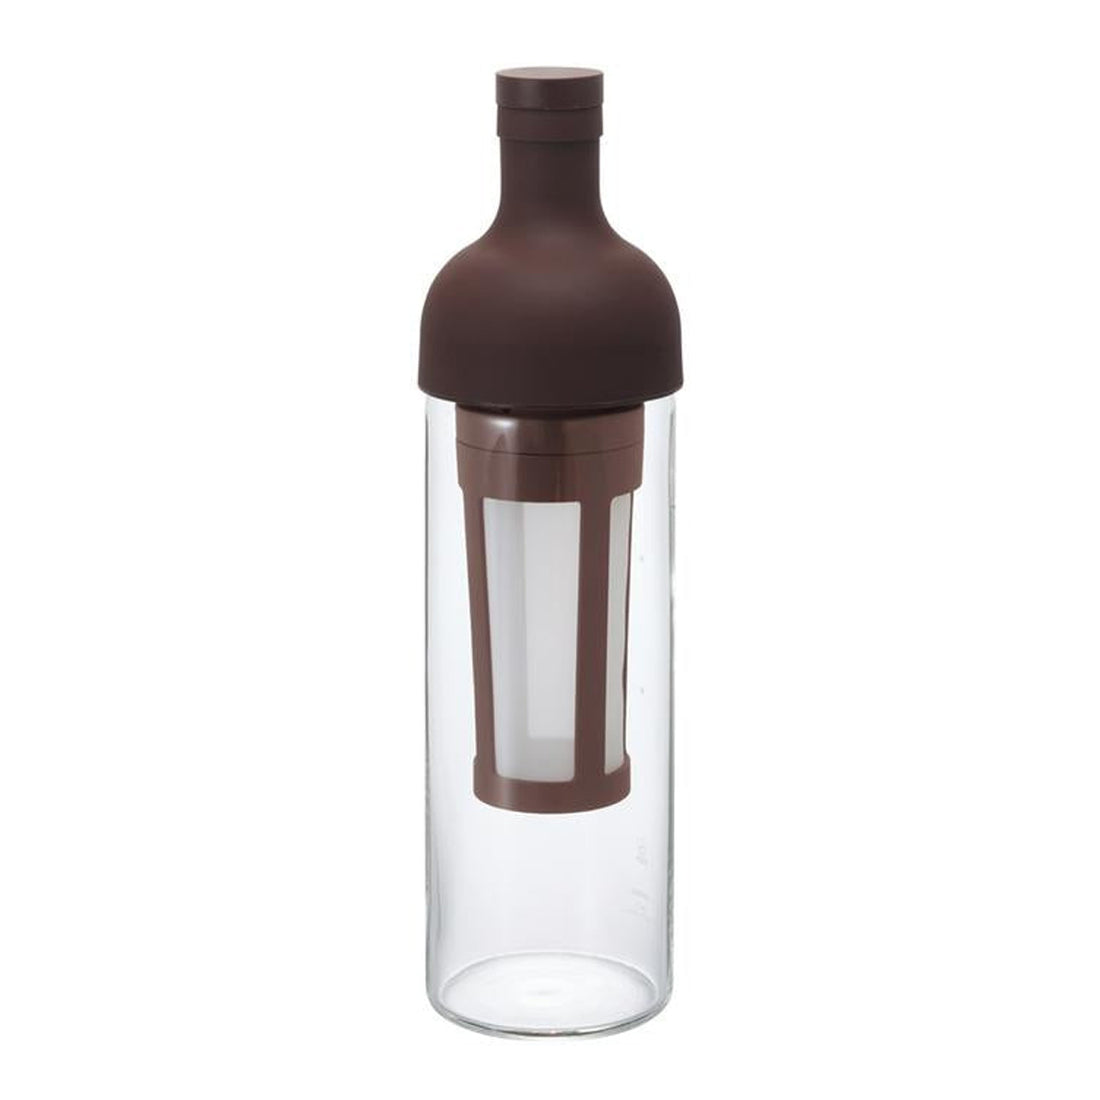 Hario, Hario Cold Brew Coffee Filter in Bottle - Brown with Free Coffee, Redber Coffee